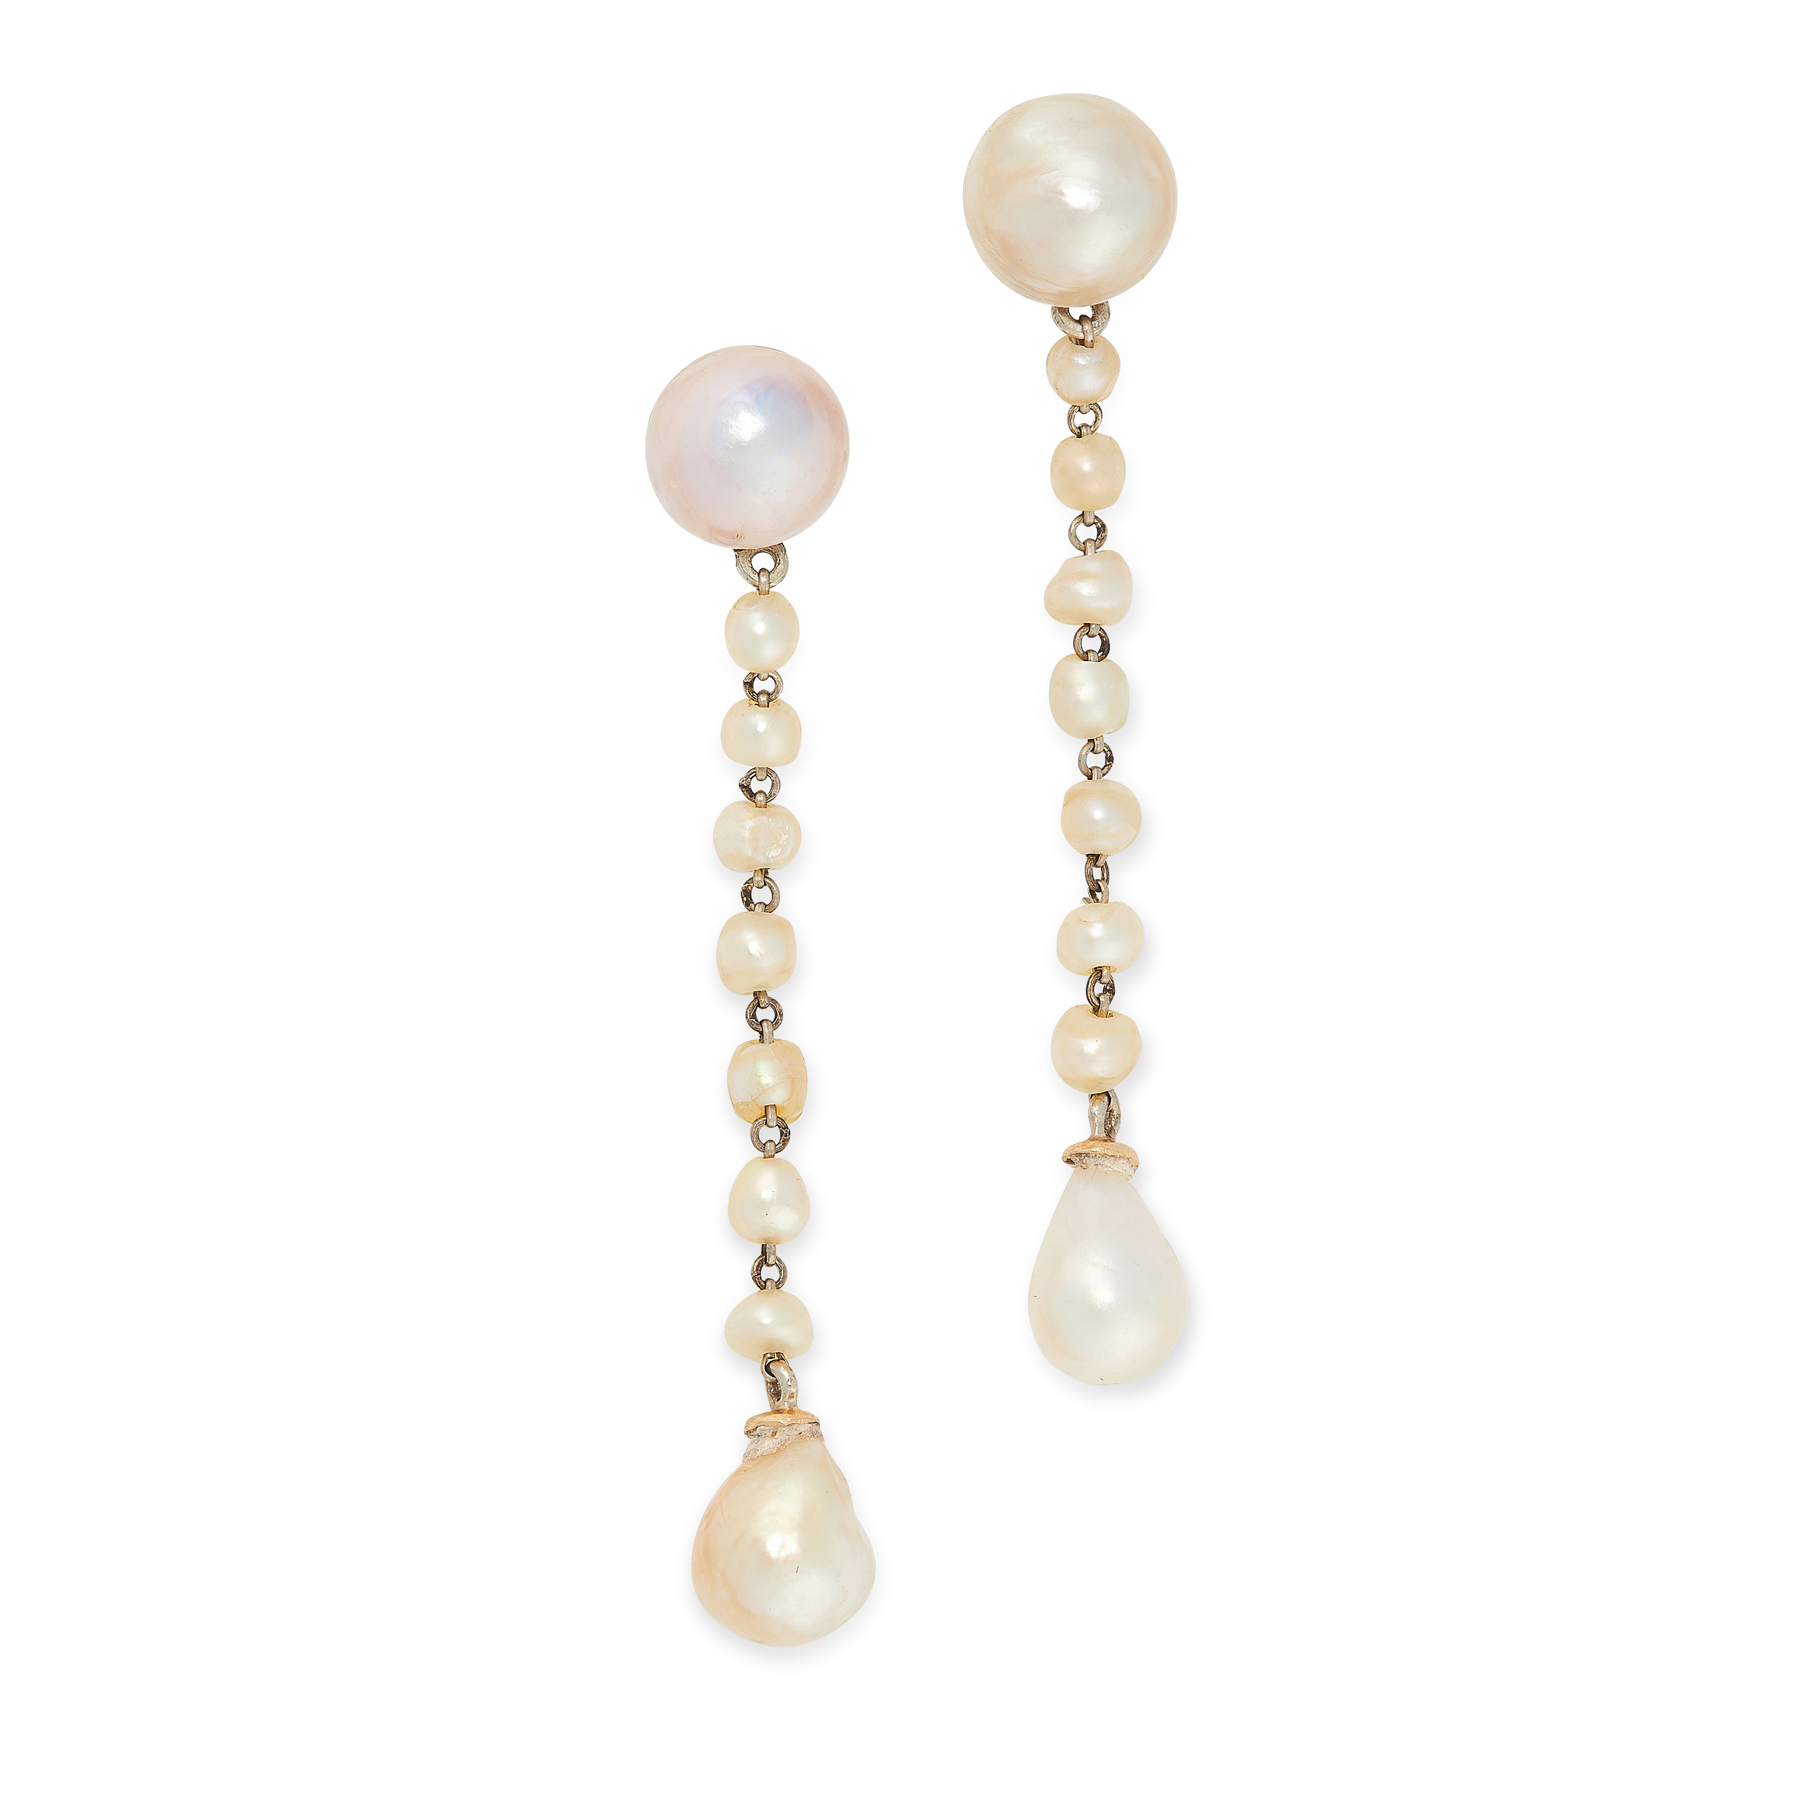 A PAIR OF NATURAL PEARL DROP EARRINGS in 18ct yellow gold, each set with a natural pearl of 7.6